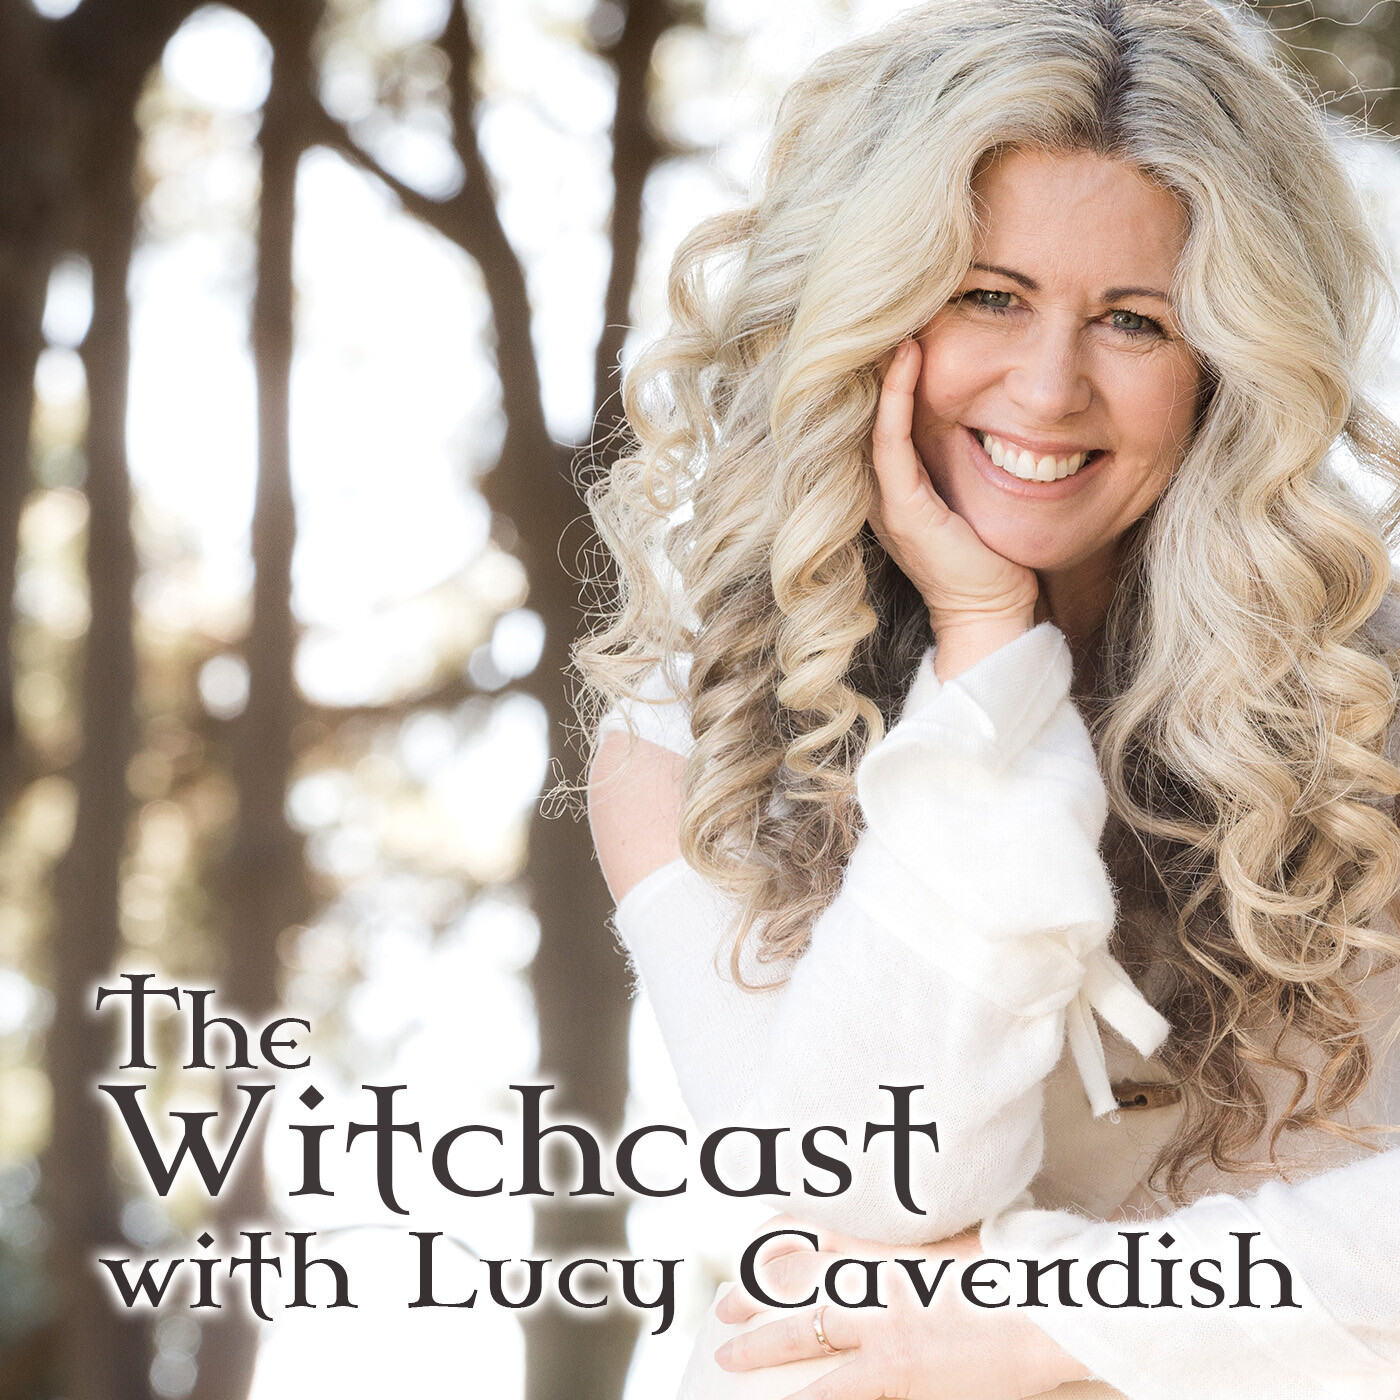 The Witchcast - An Apology for Witch-hunting, the Frightening Faery Abduction of Reverend Robert Kirk, and How to Discover your Witch Voice